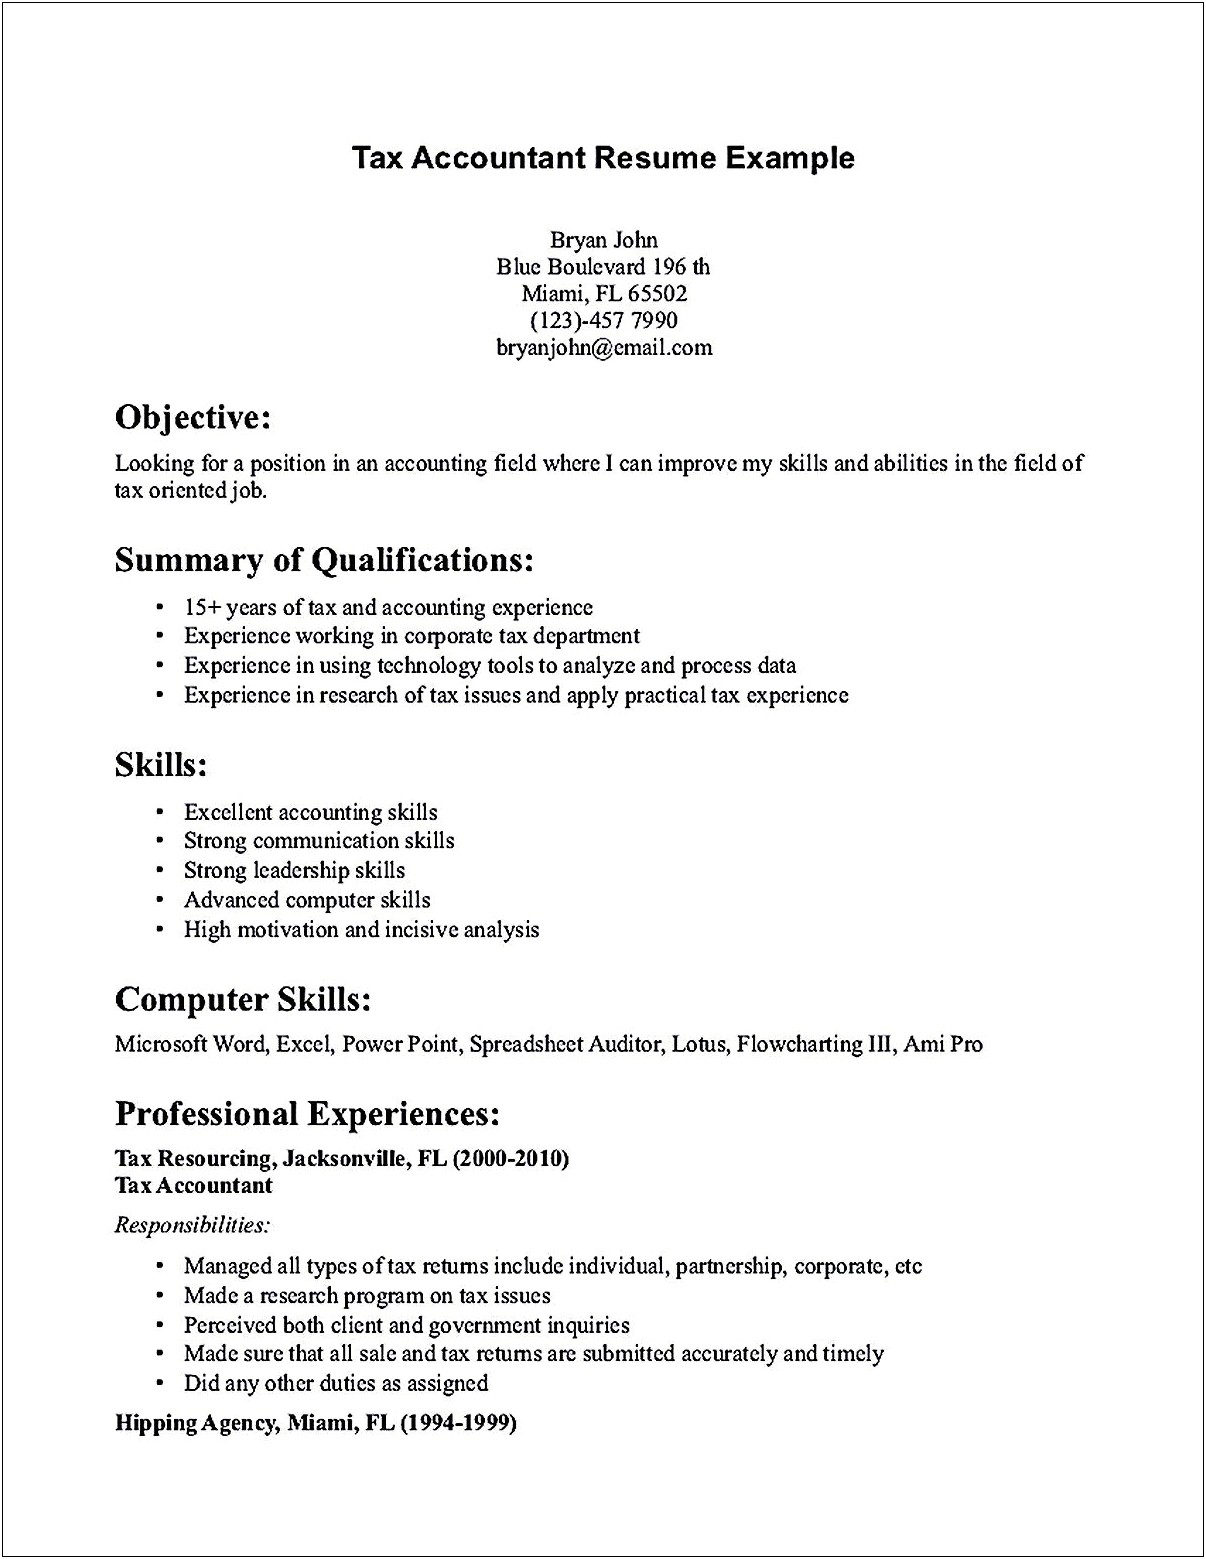 Best Skills To List On Resume For Accounting